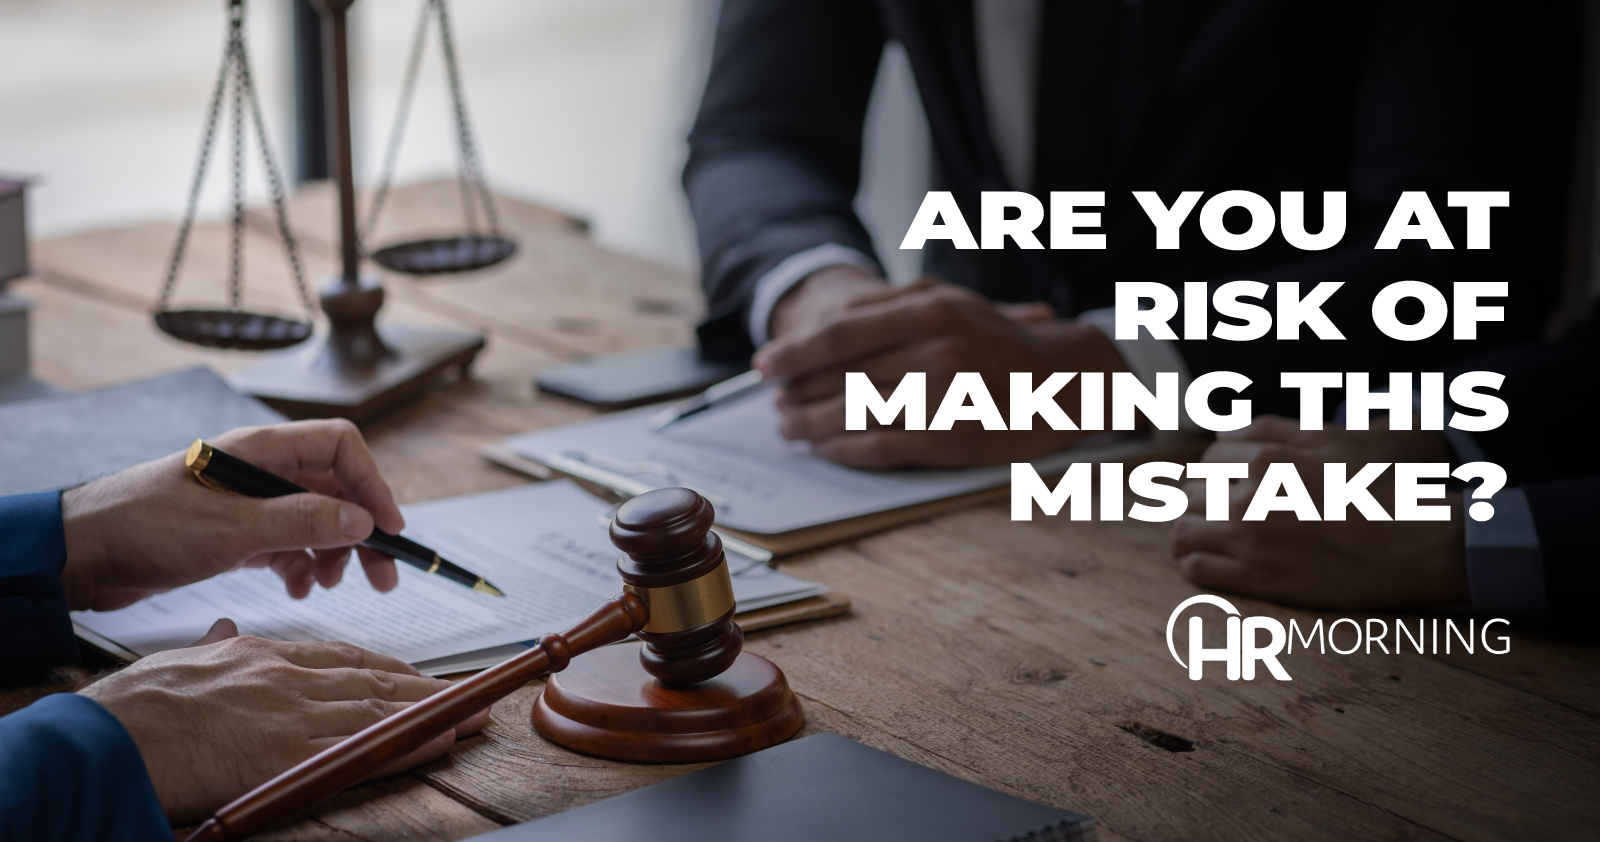 Are you at risk of making this mistake?